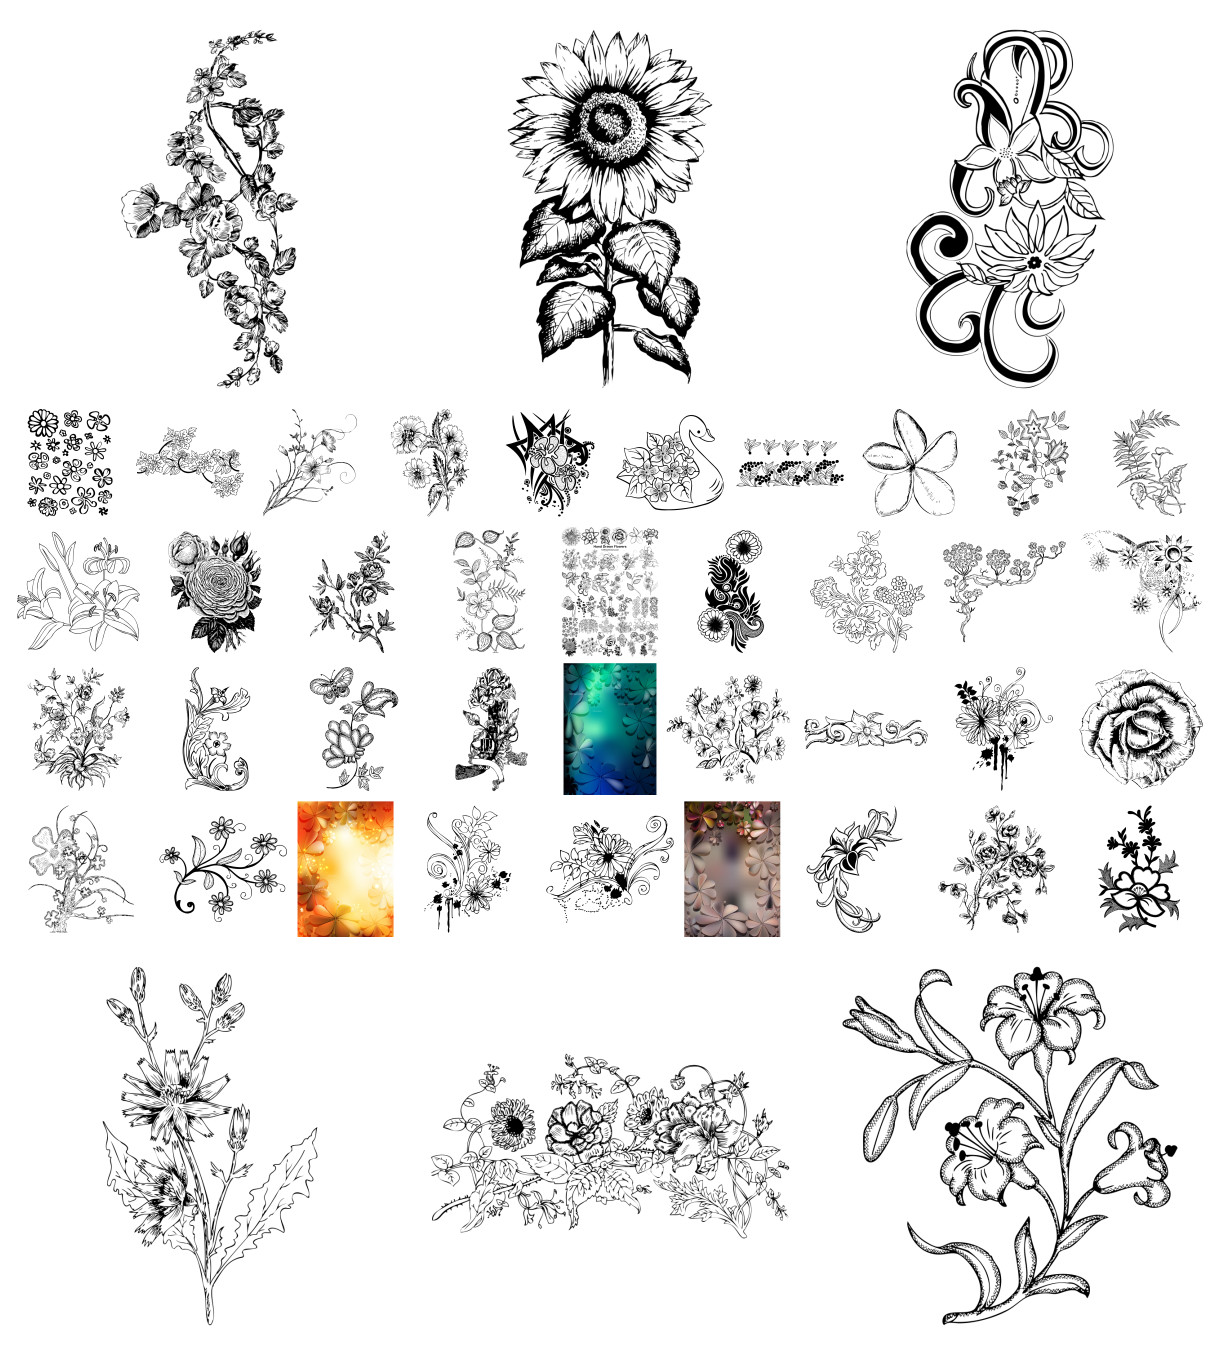 Floral Fantasy – A Flourishing Collection of Hand-Drawn Flower Vectors